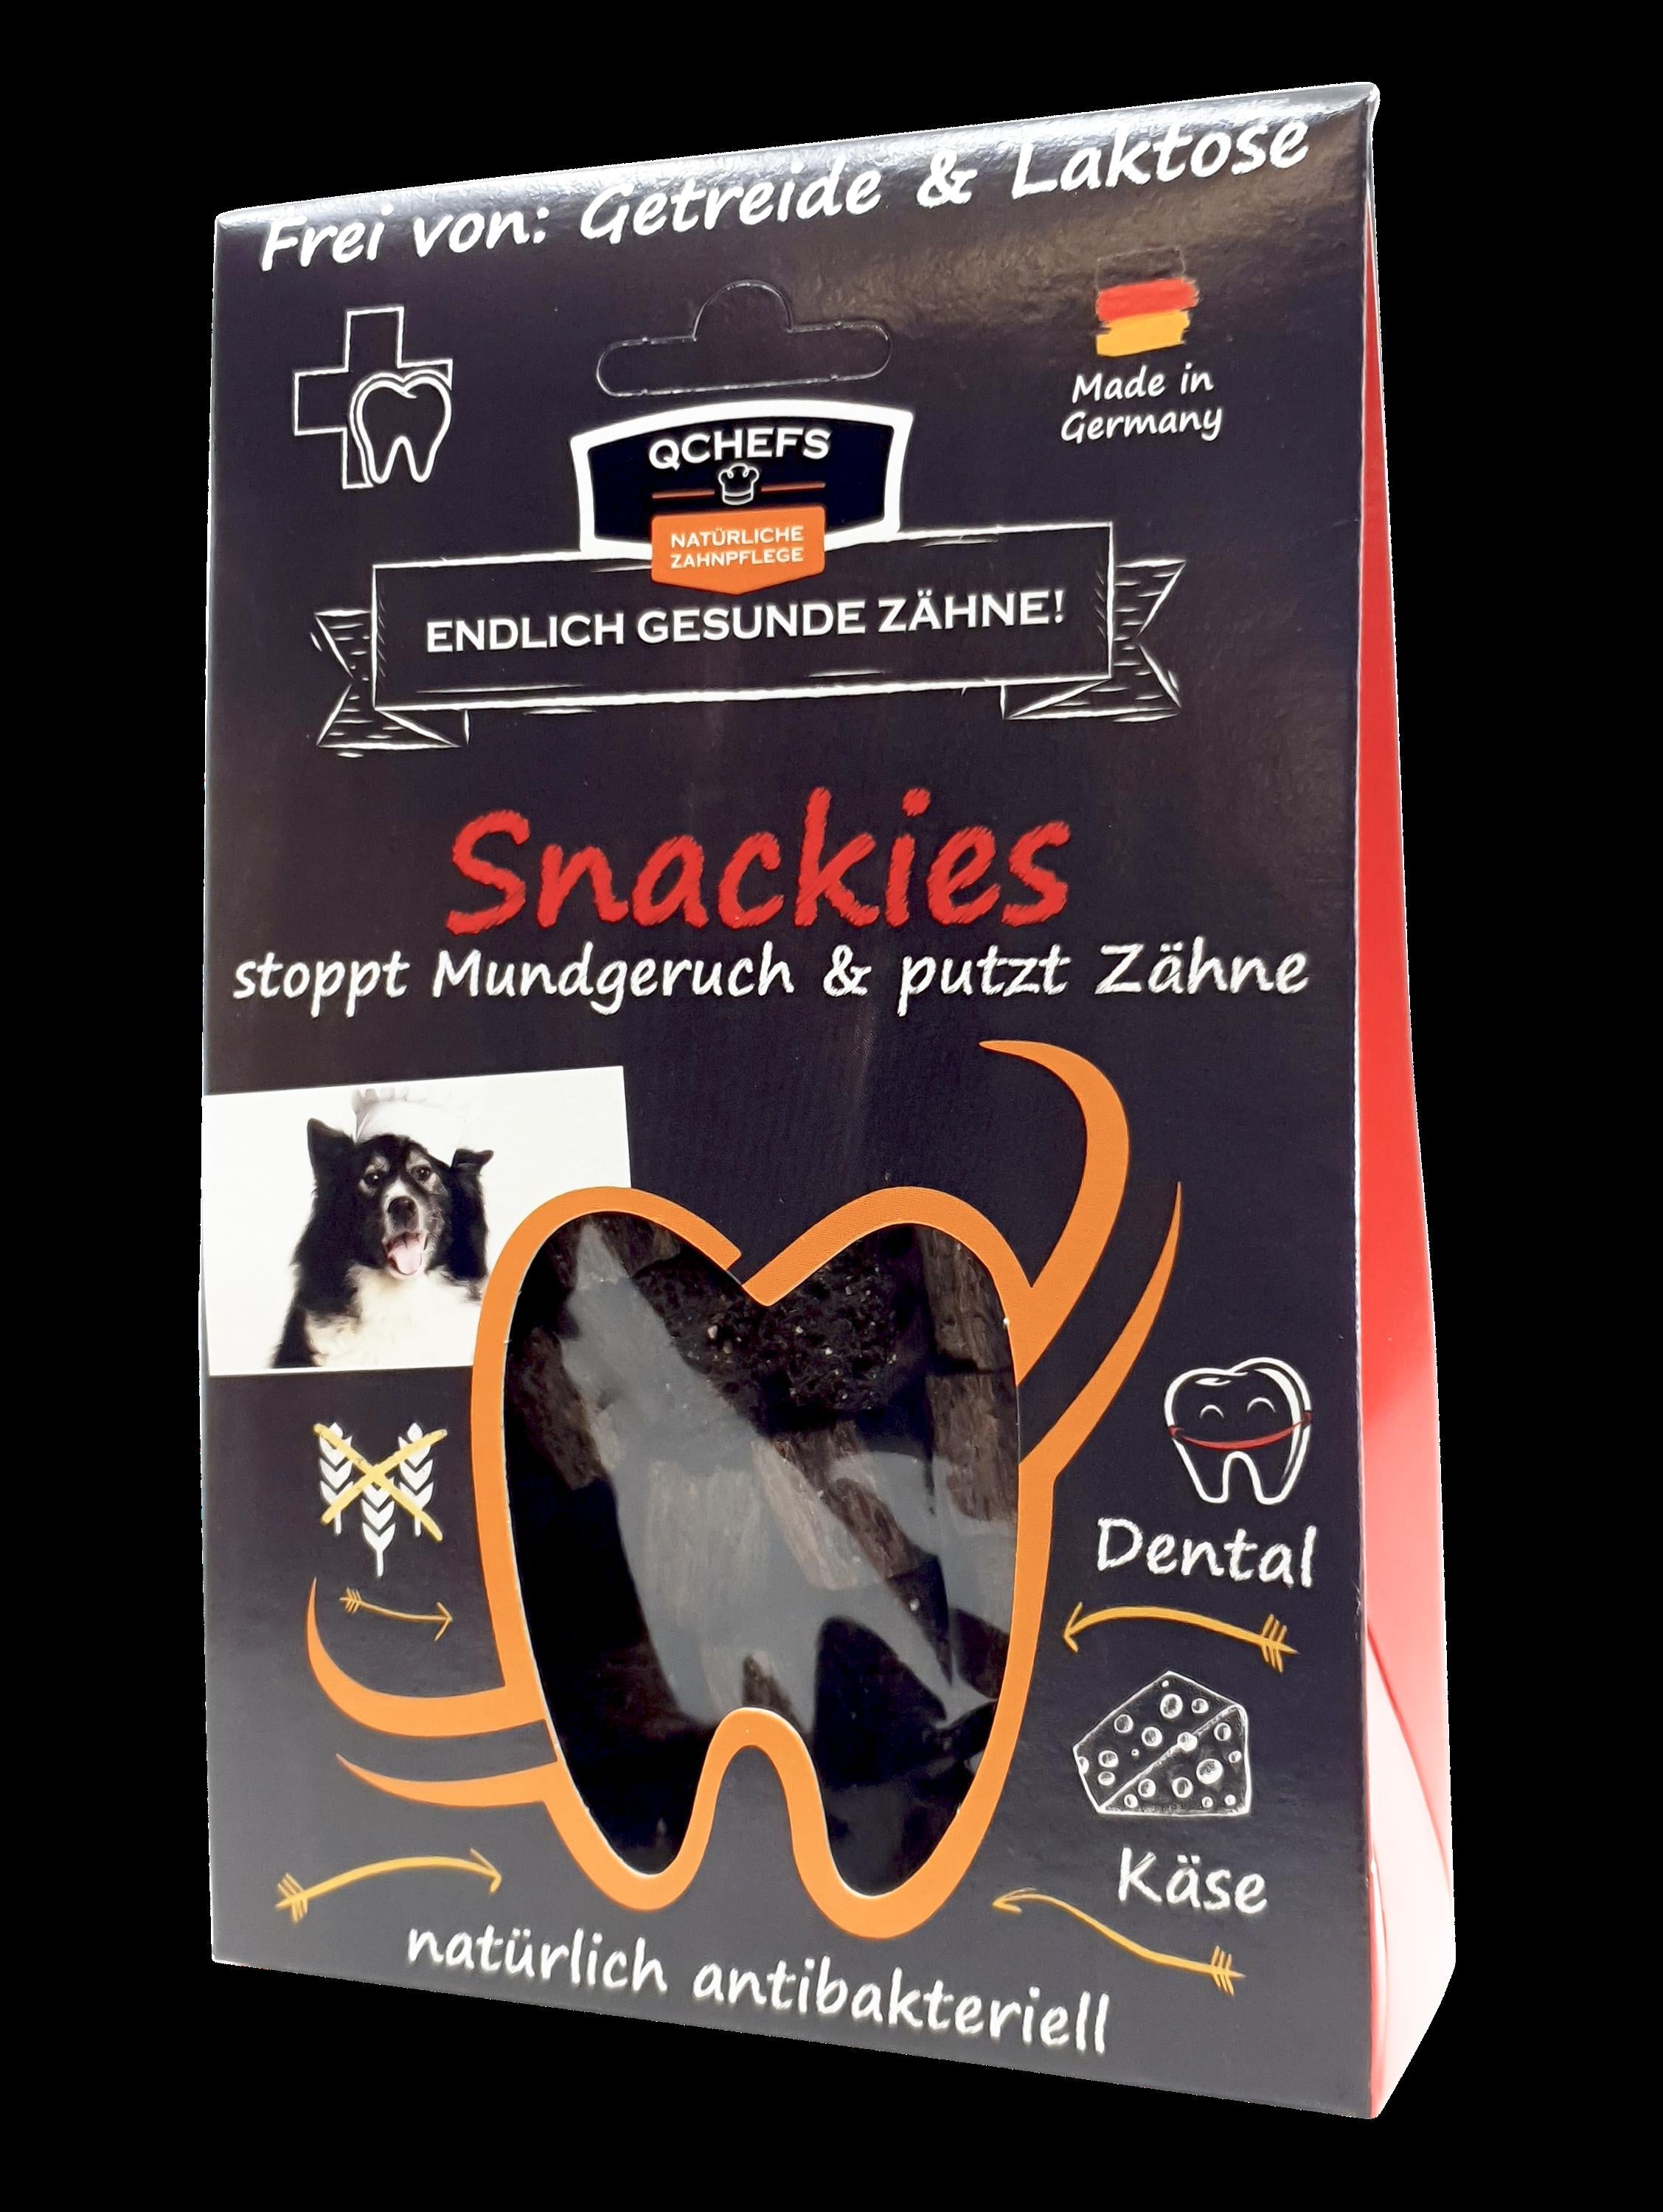 QCHEFS - Snackies 65g